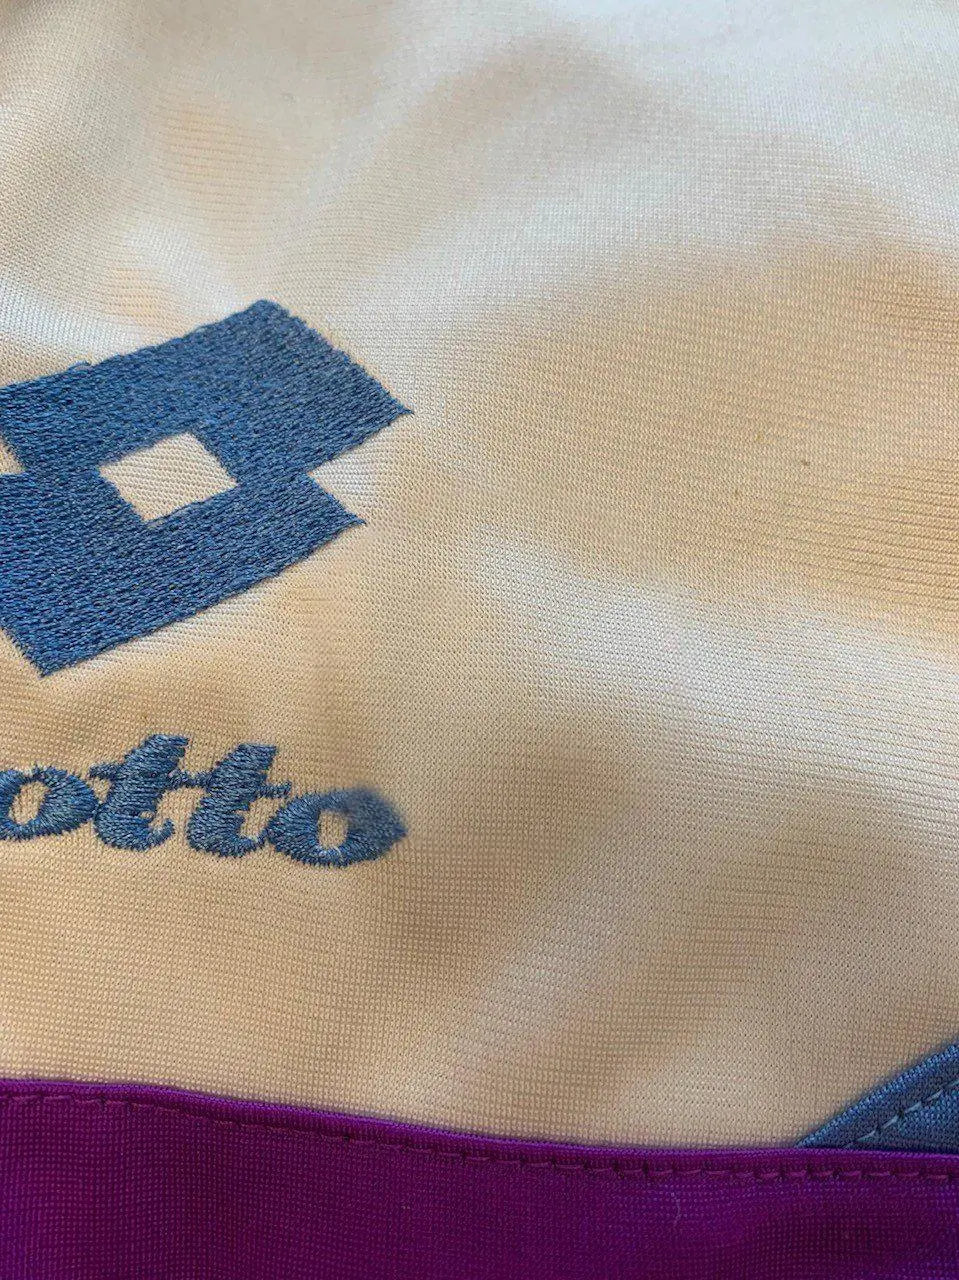 Lotto - 90s Track Jacket by Lotto- ThriftTale.com - Vintage and second handclothing